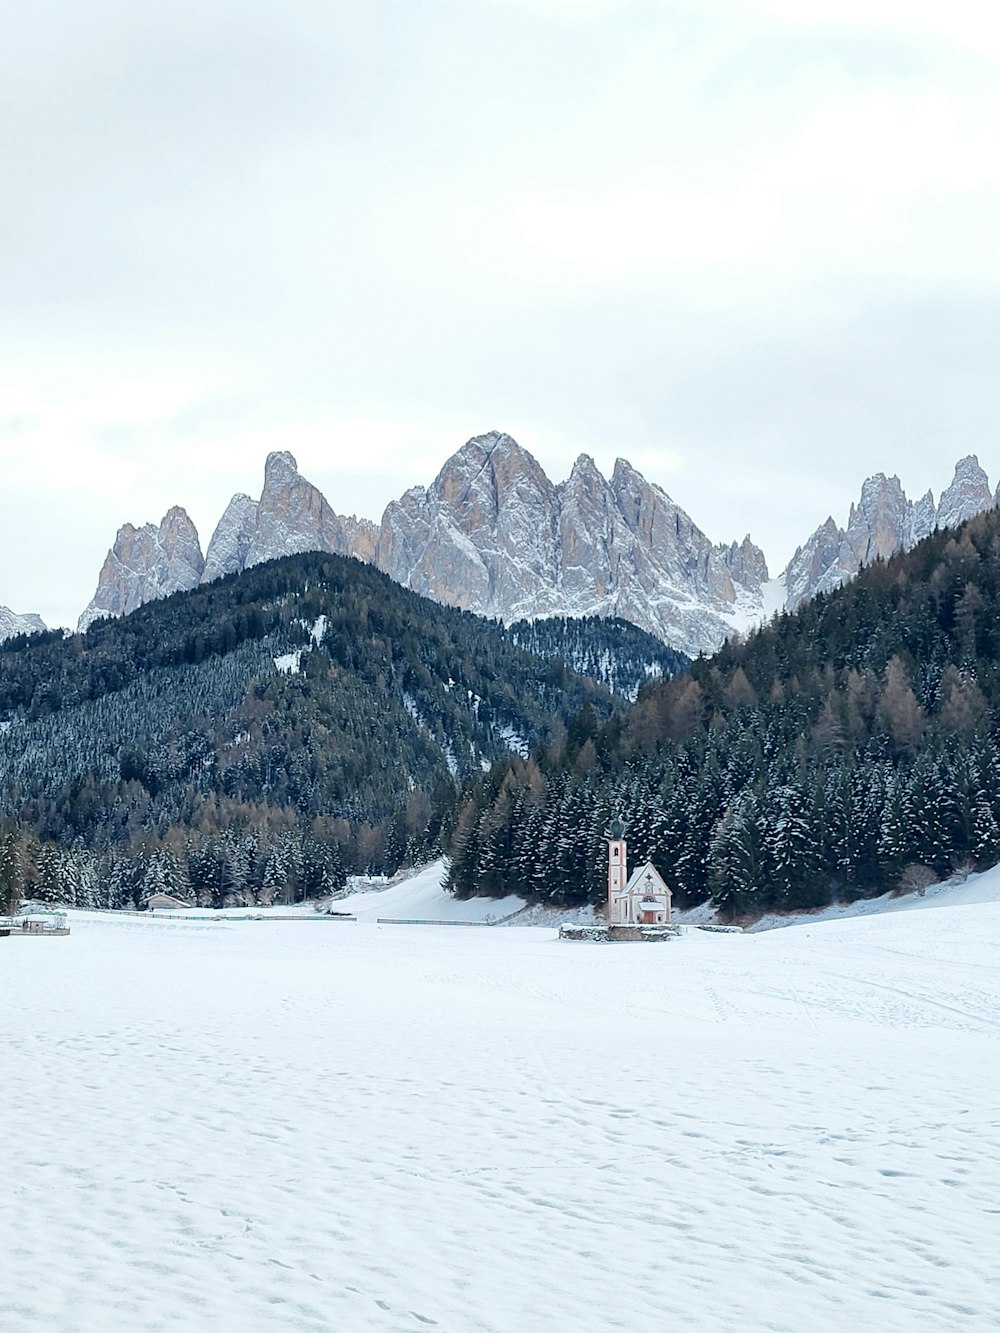 a snowy landscape with a church and mountains in the background